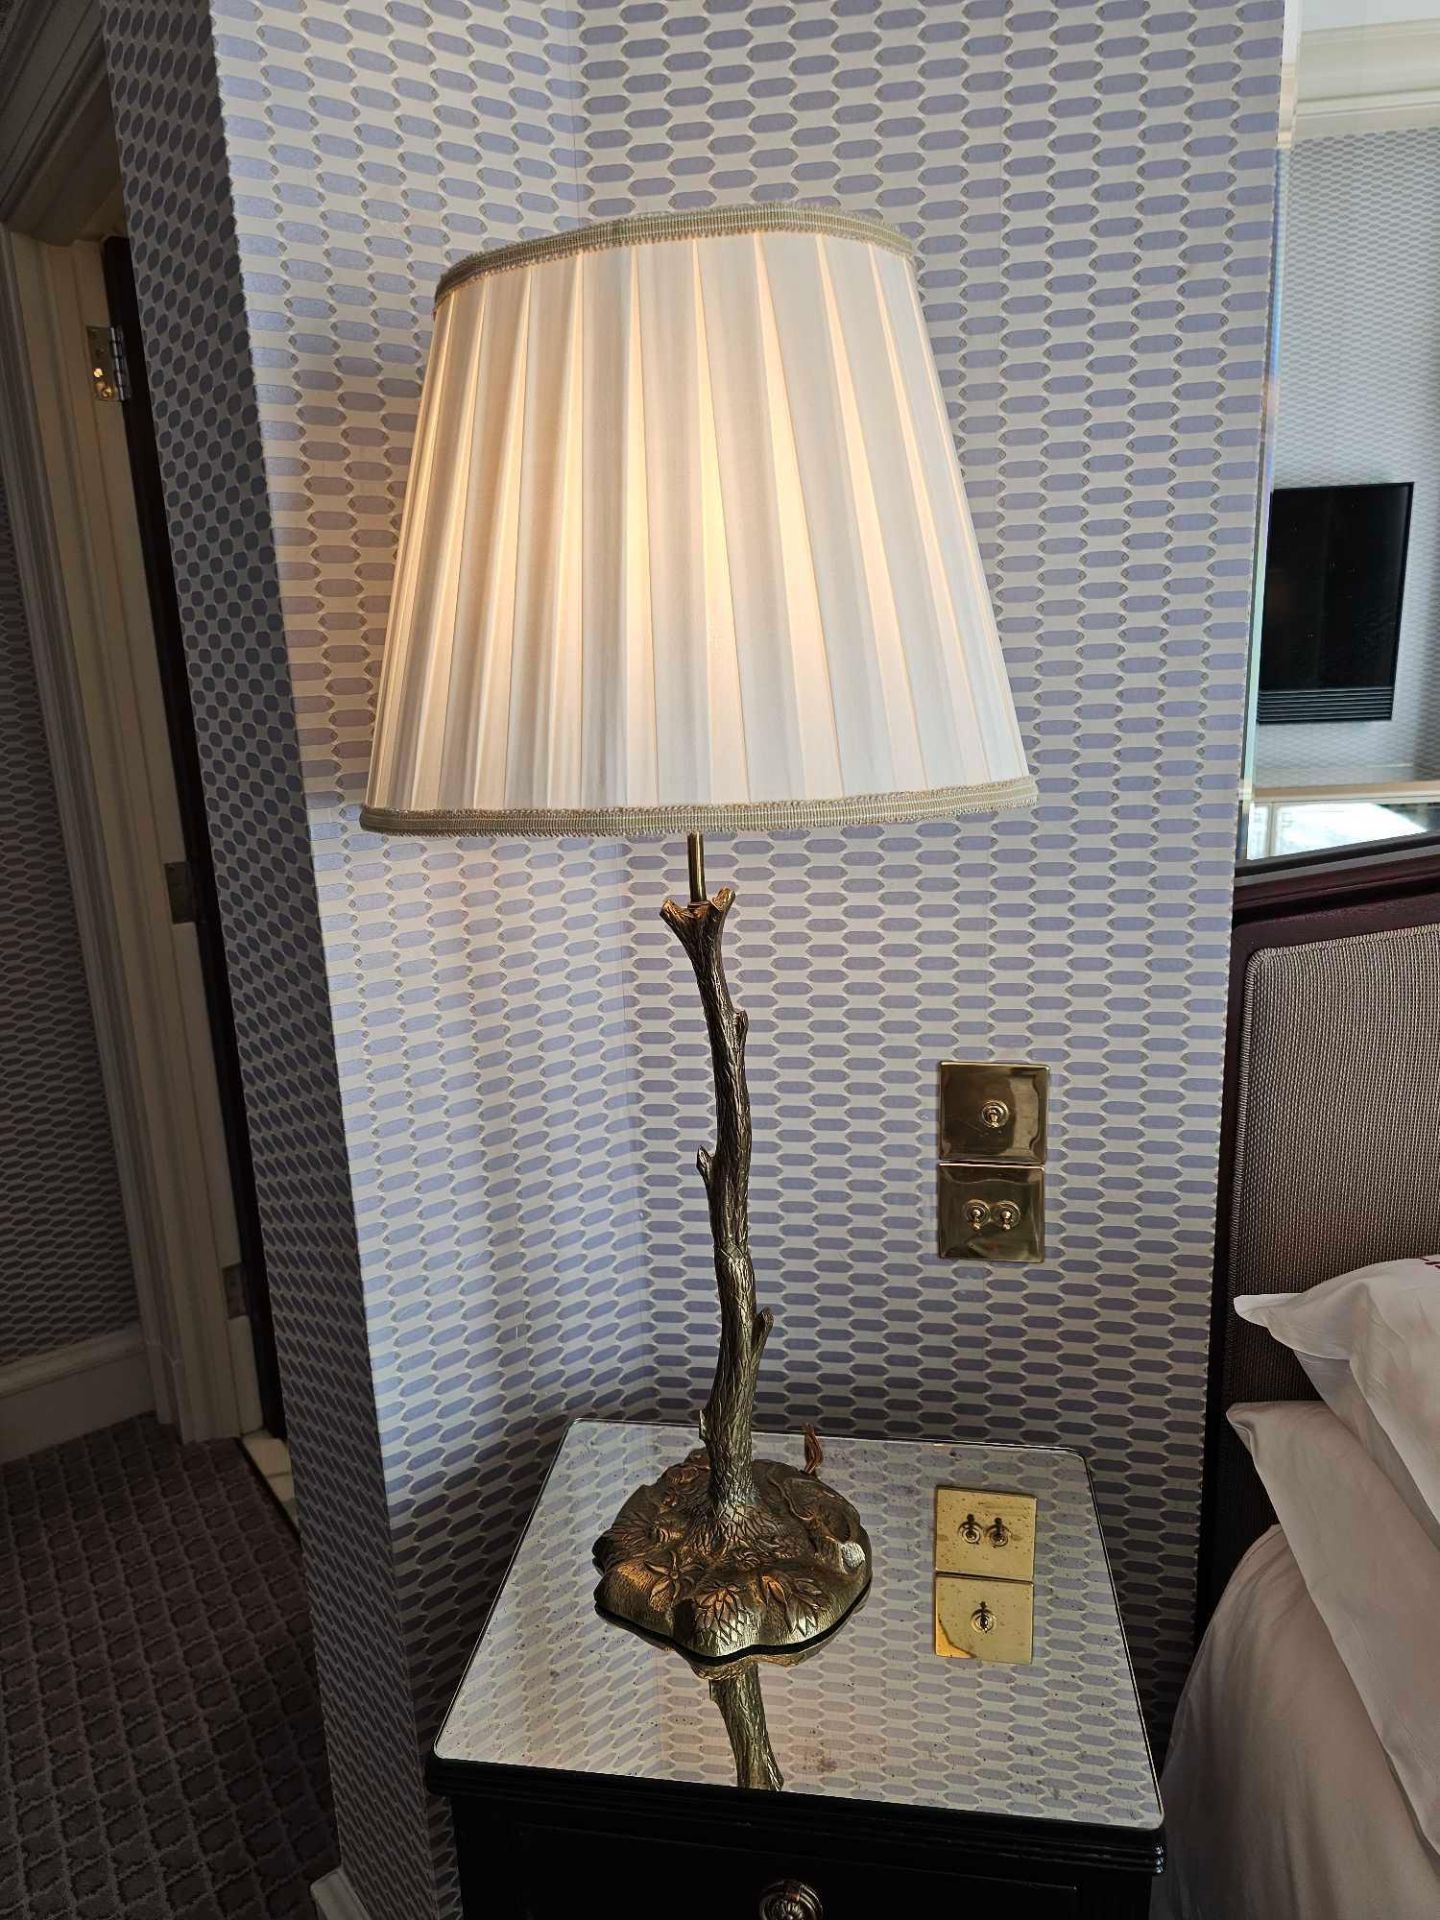 A Pair Of Truro Twig Table Lamp Inspired From A Mid-Century French Design Organic Flowing Stem - Image 2 of 3